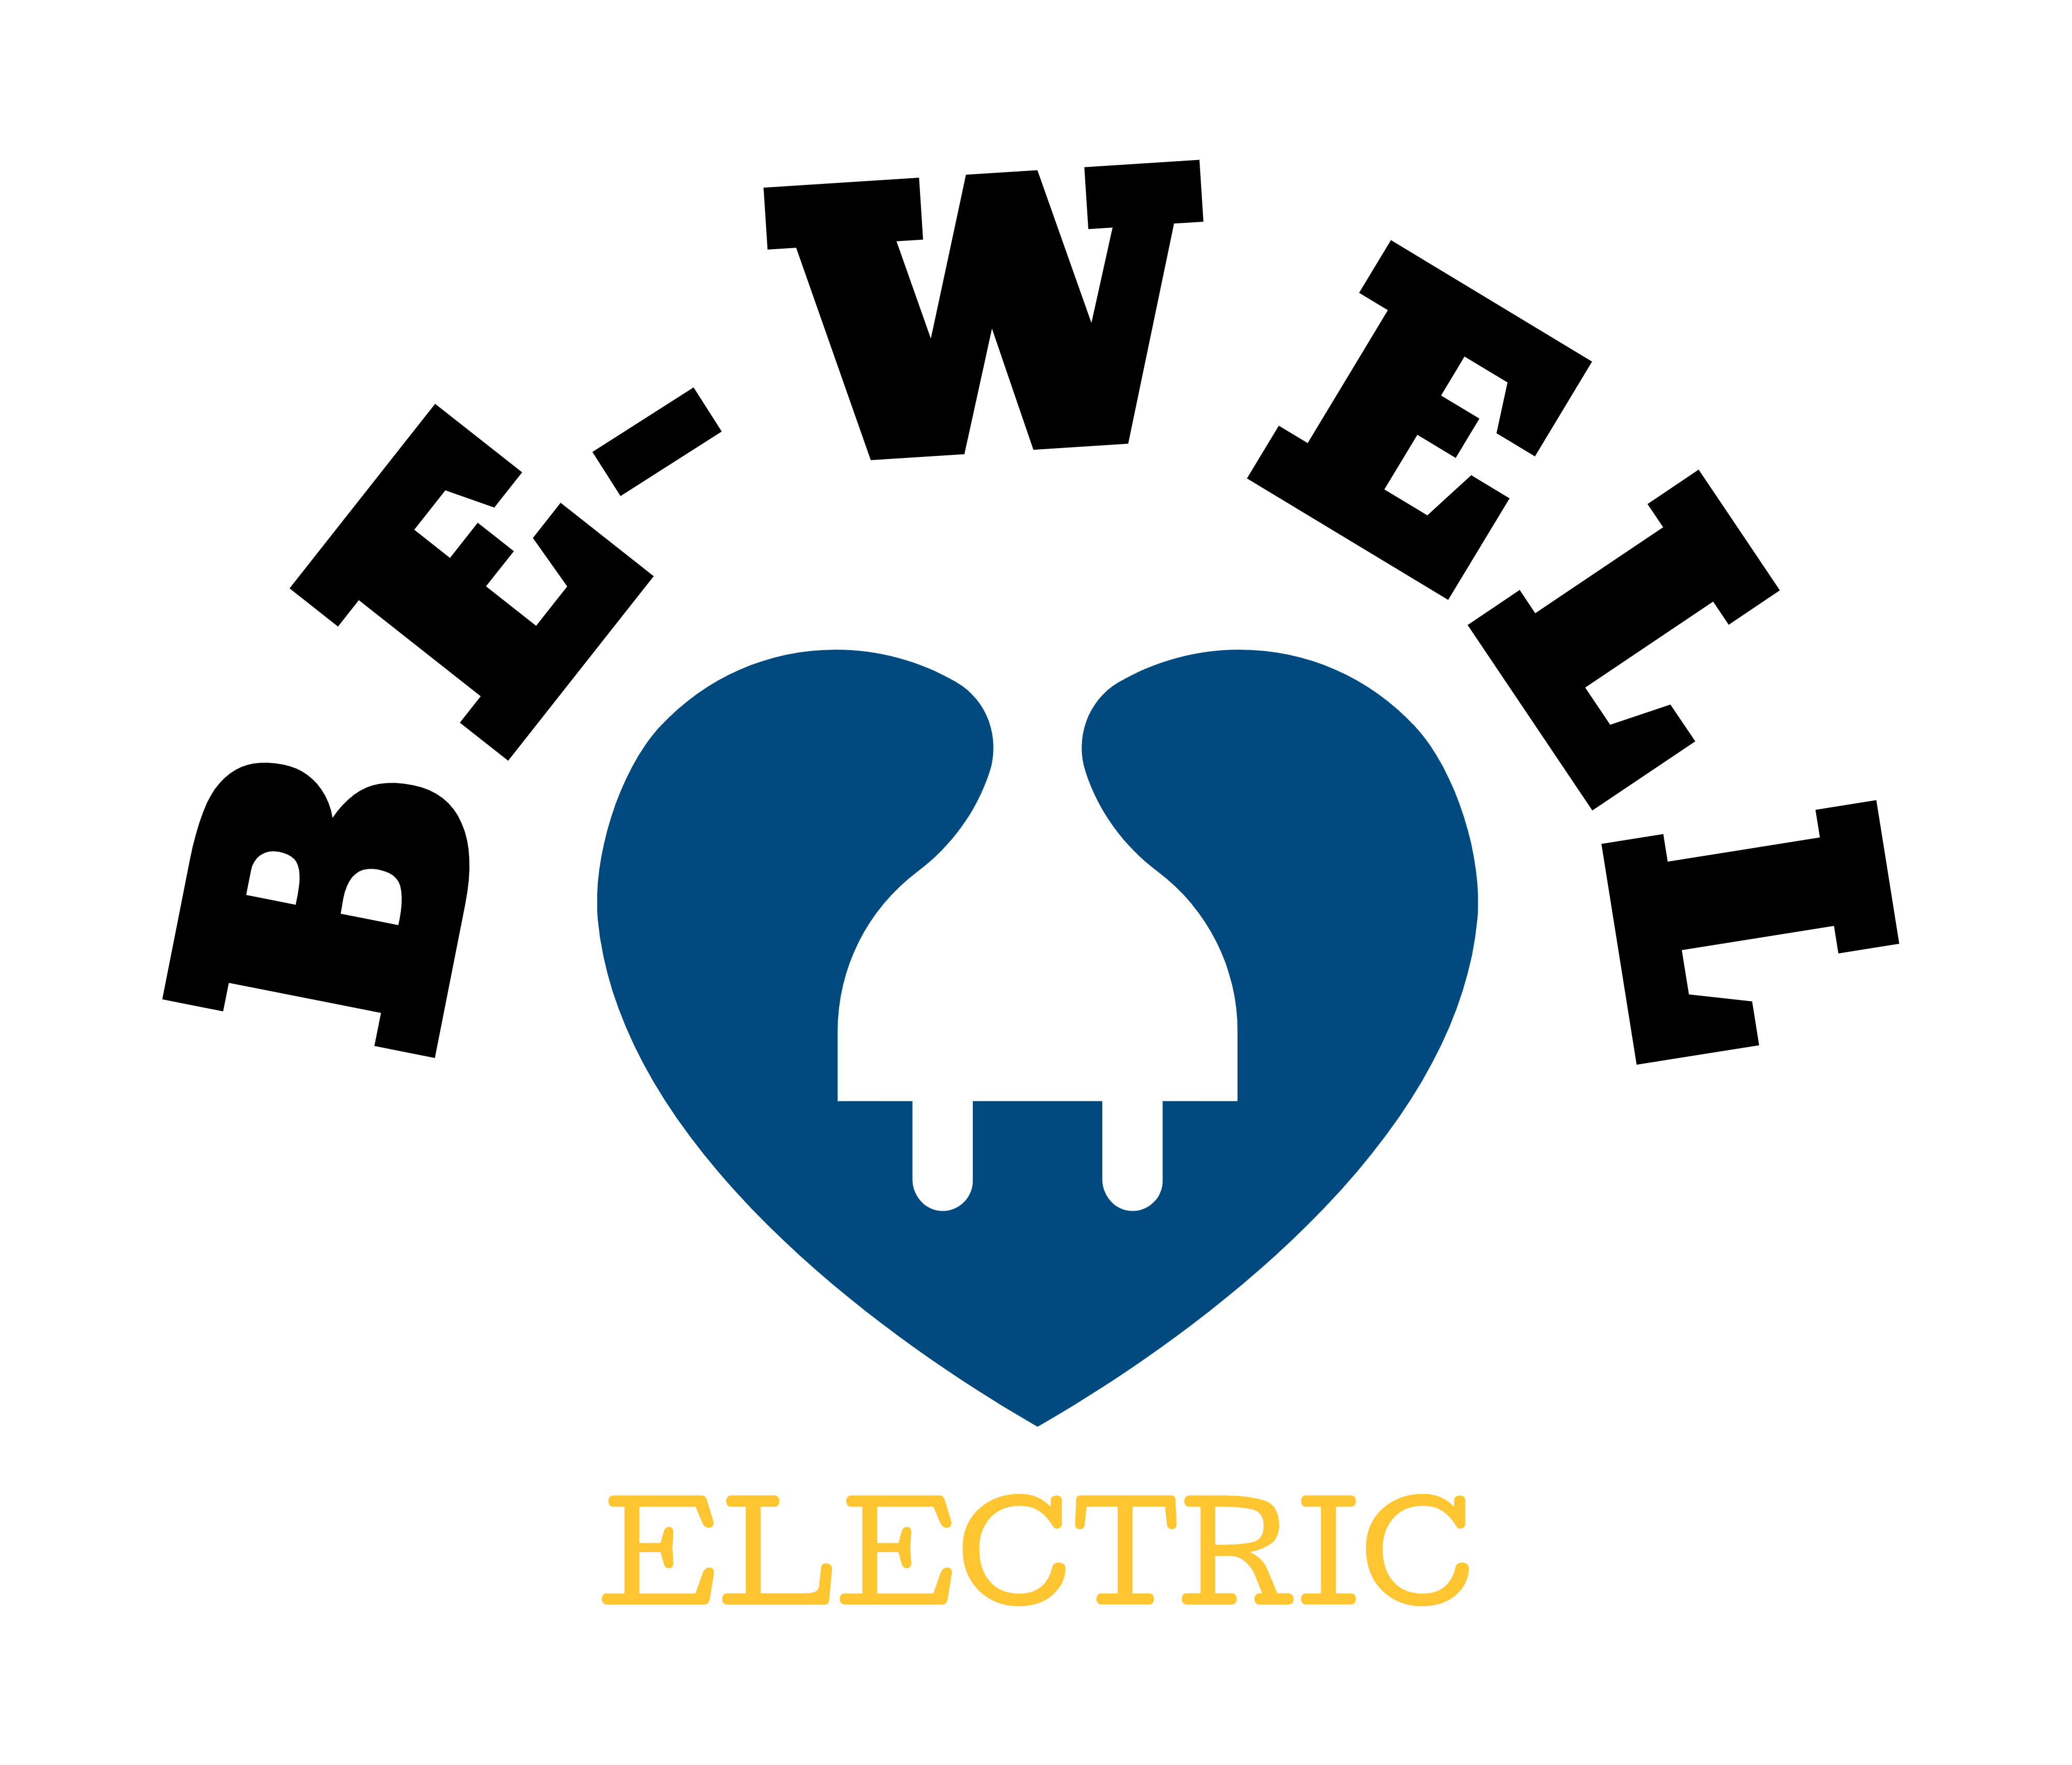 Be-Well Electric Logo